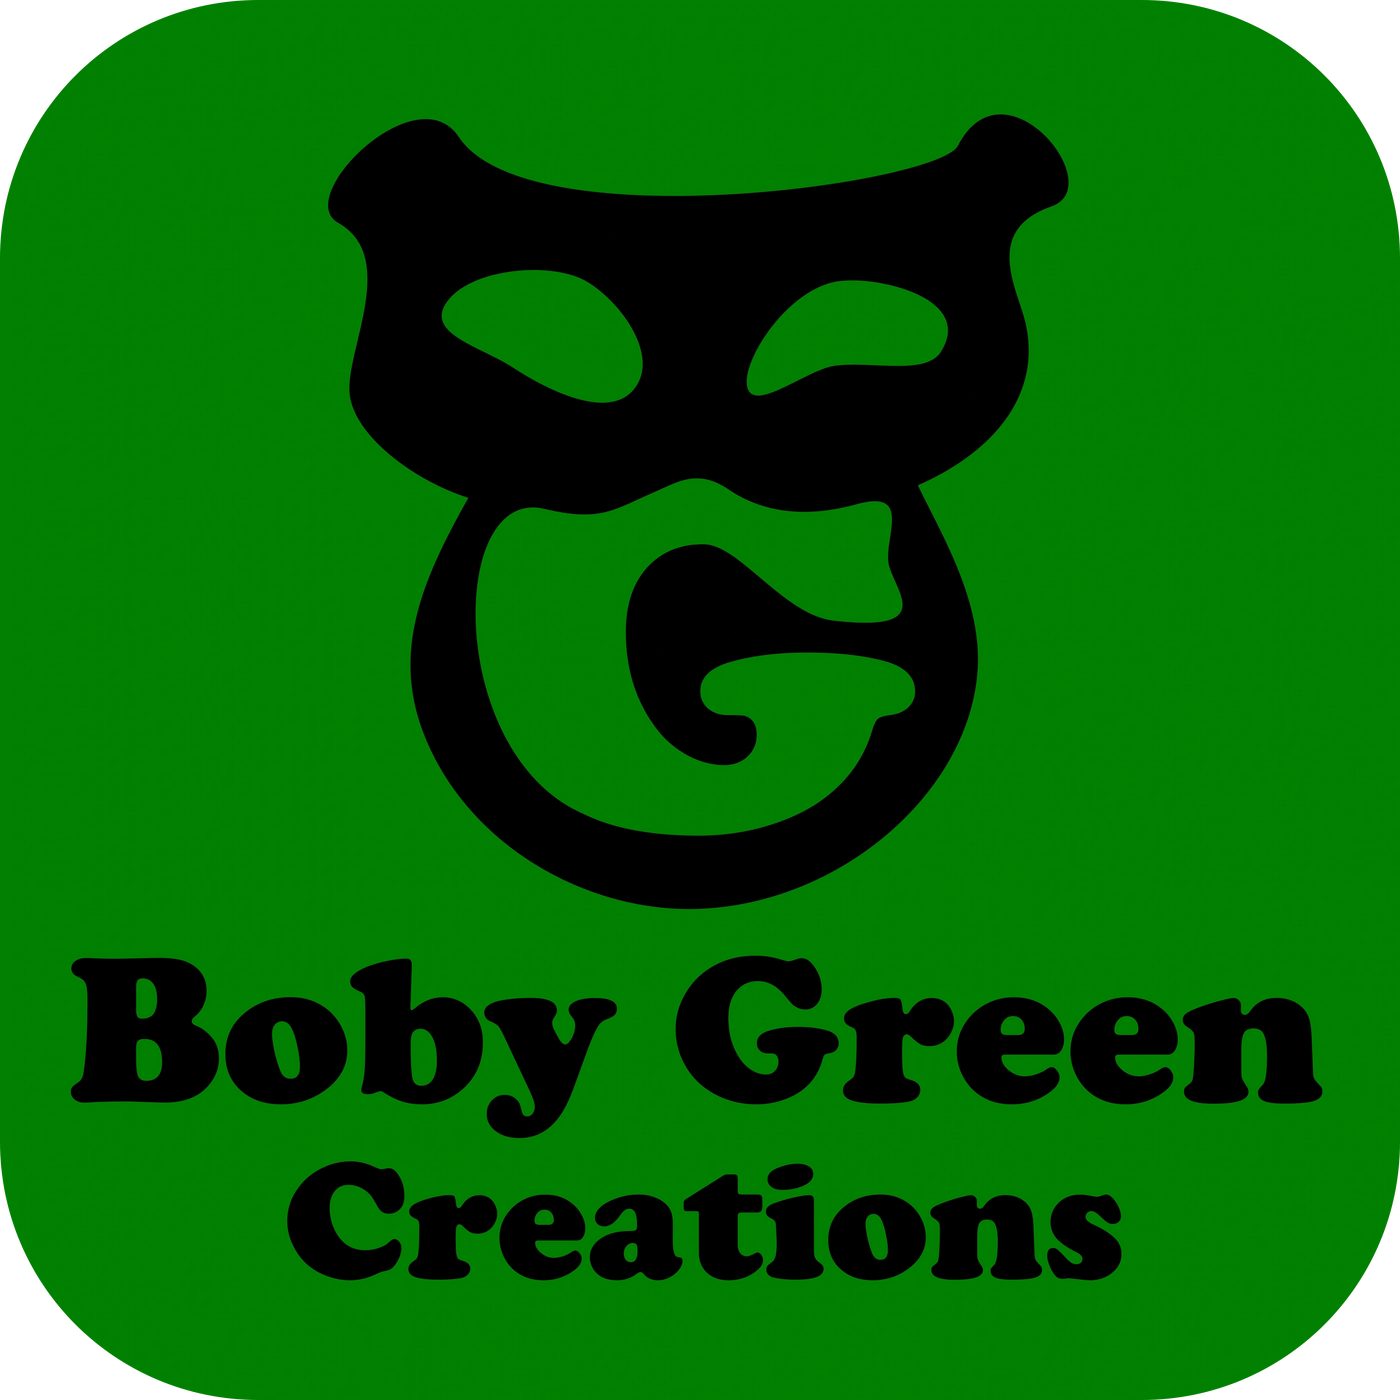 Boby Green Creations